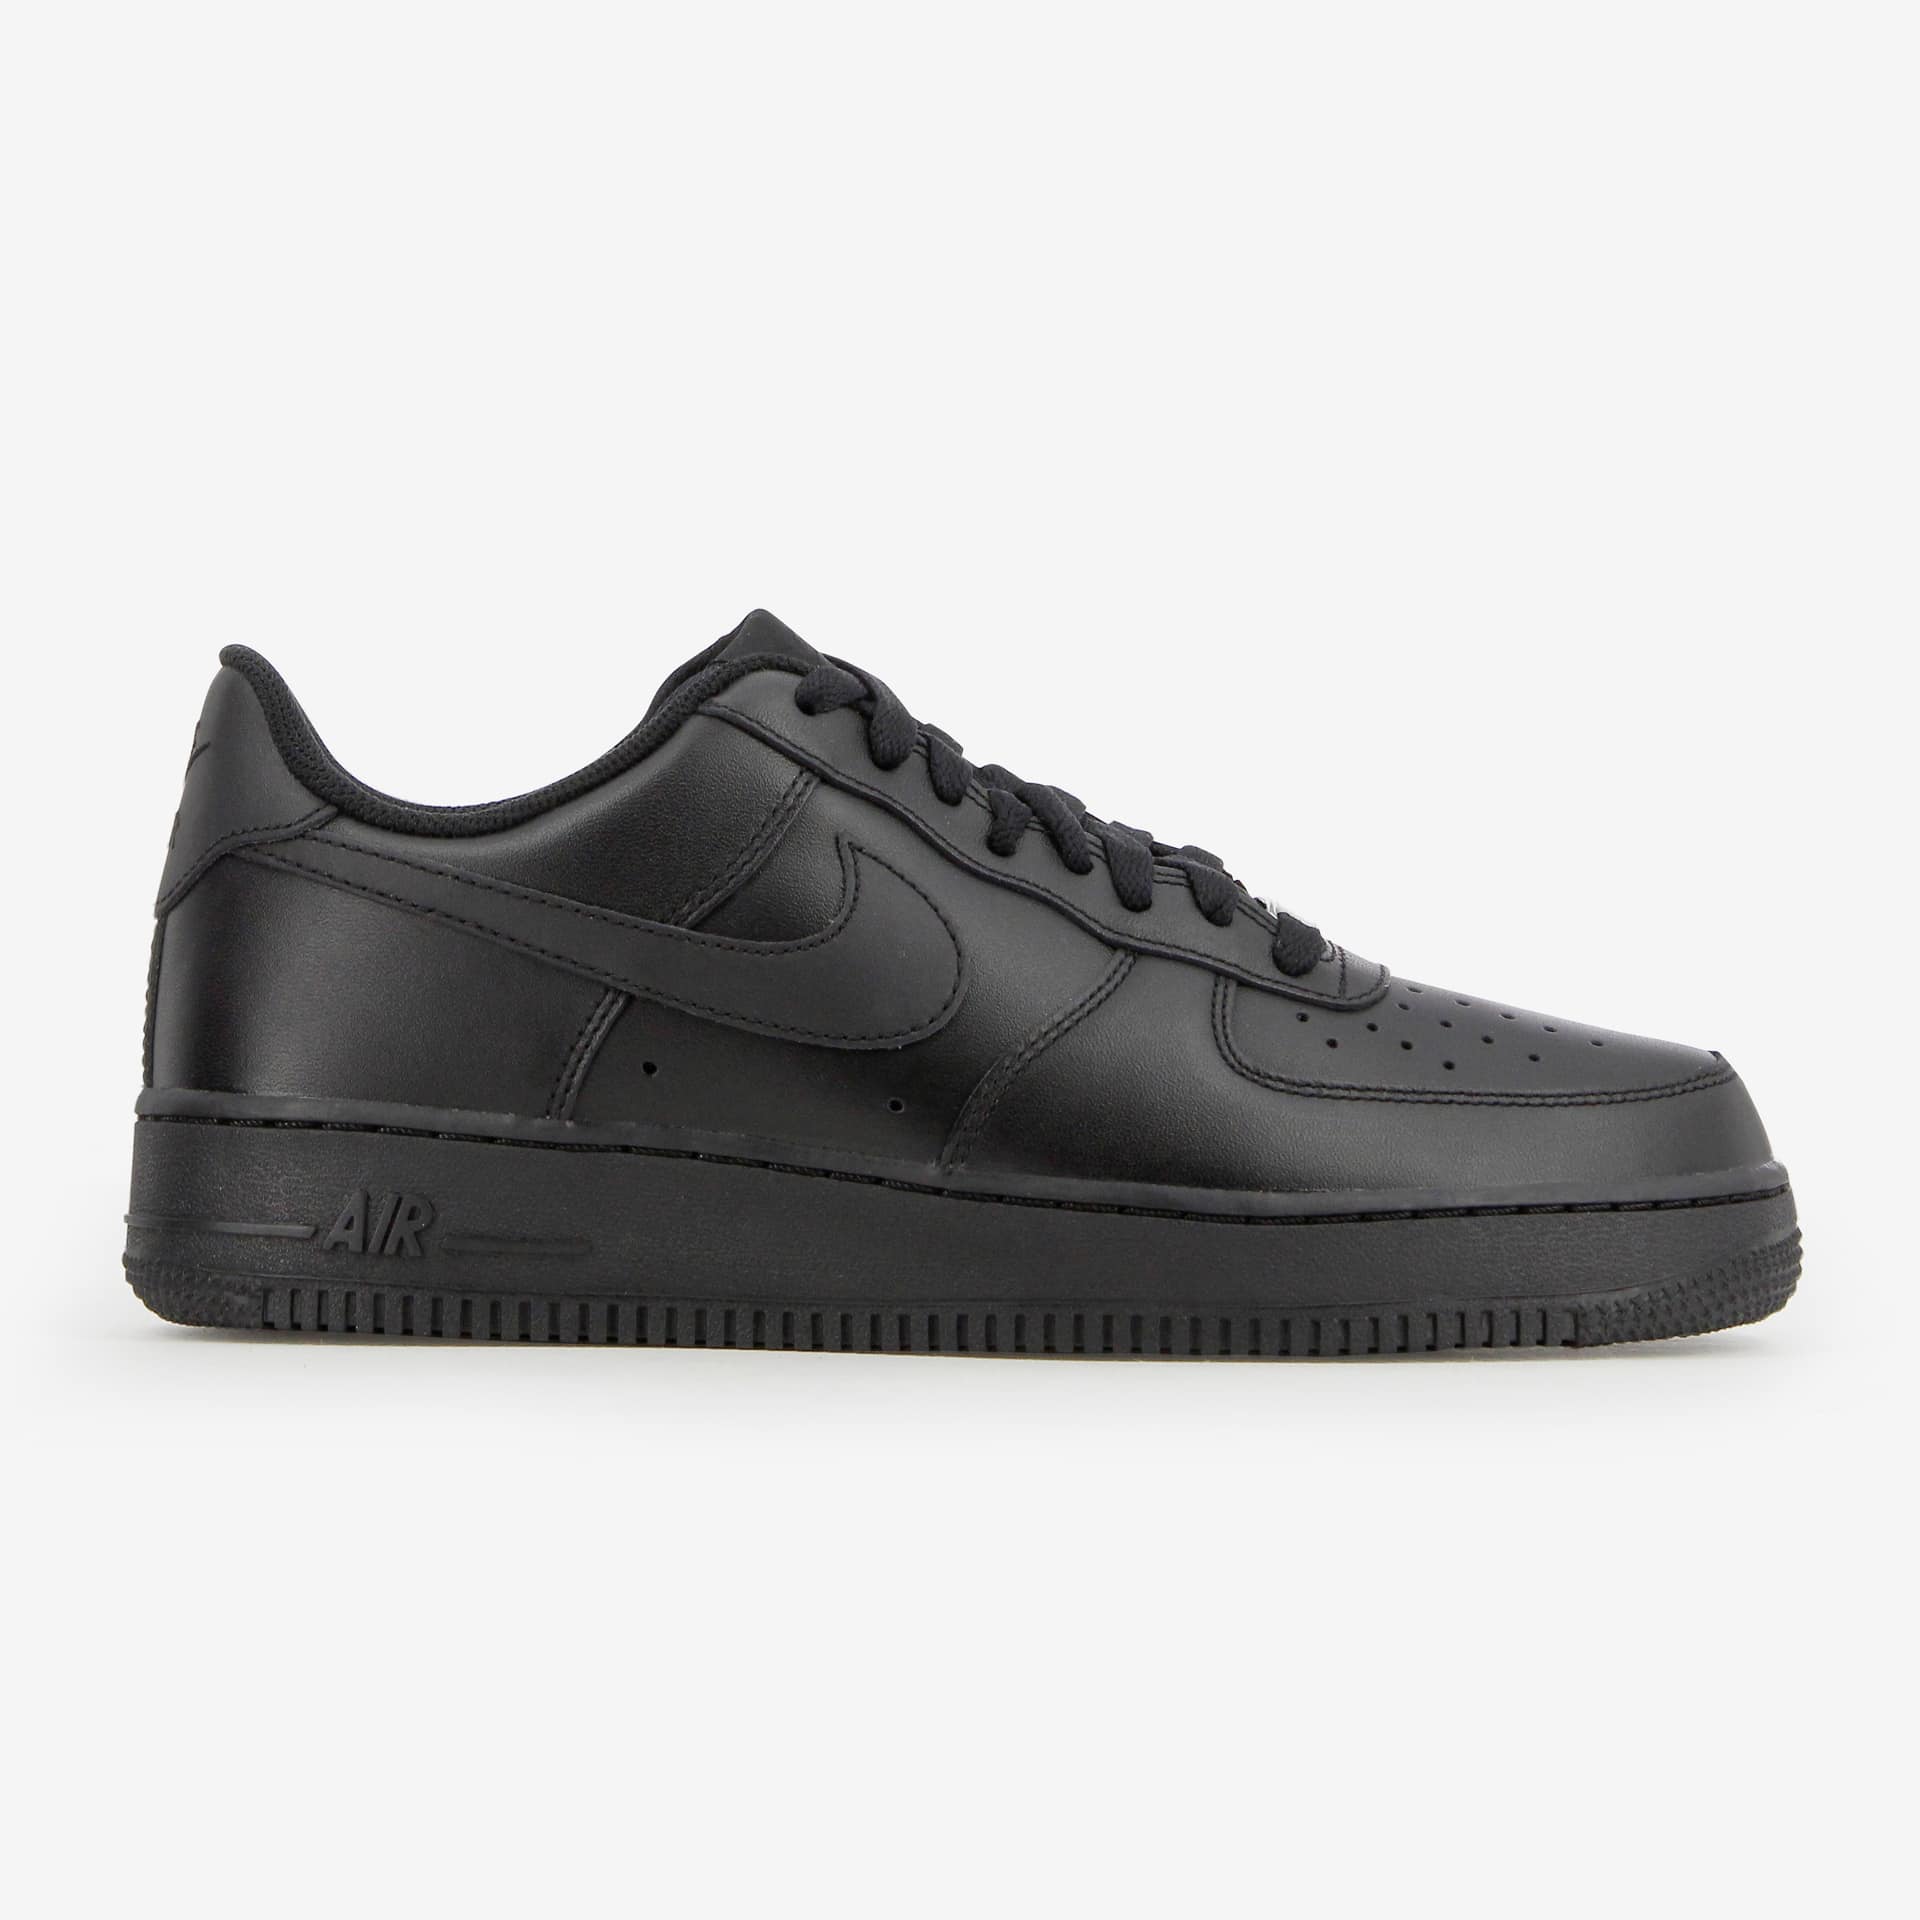 Cottage Privileged Get married nike air force black mat ...